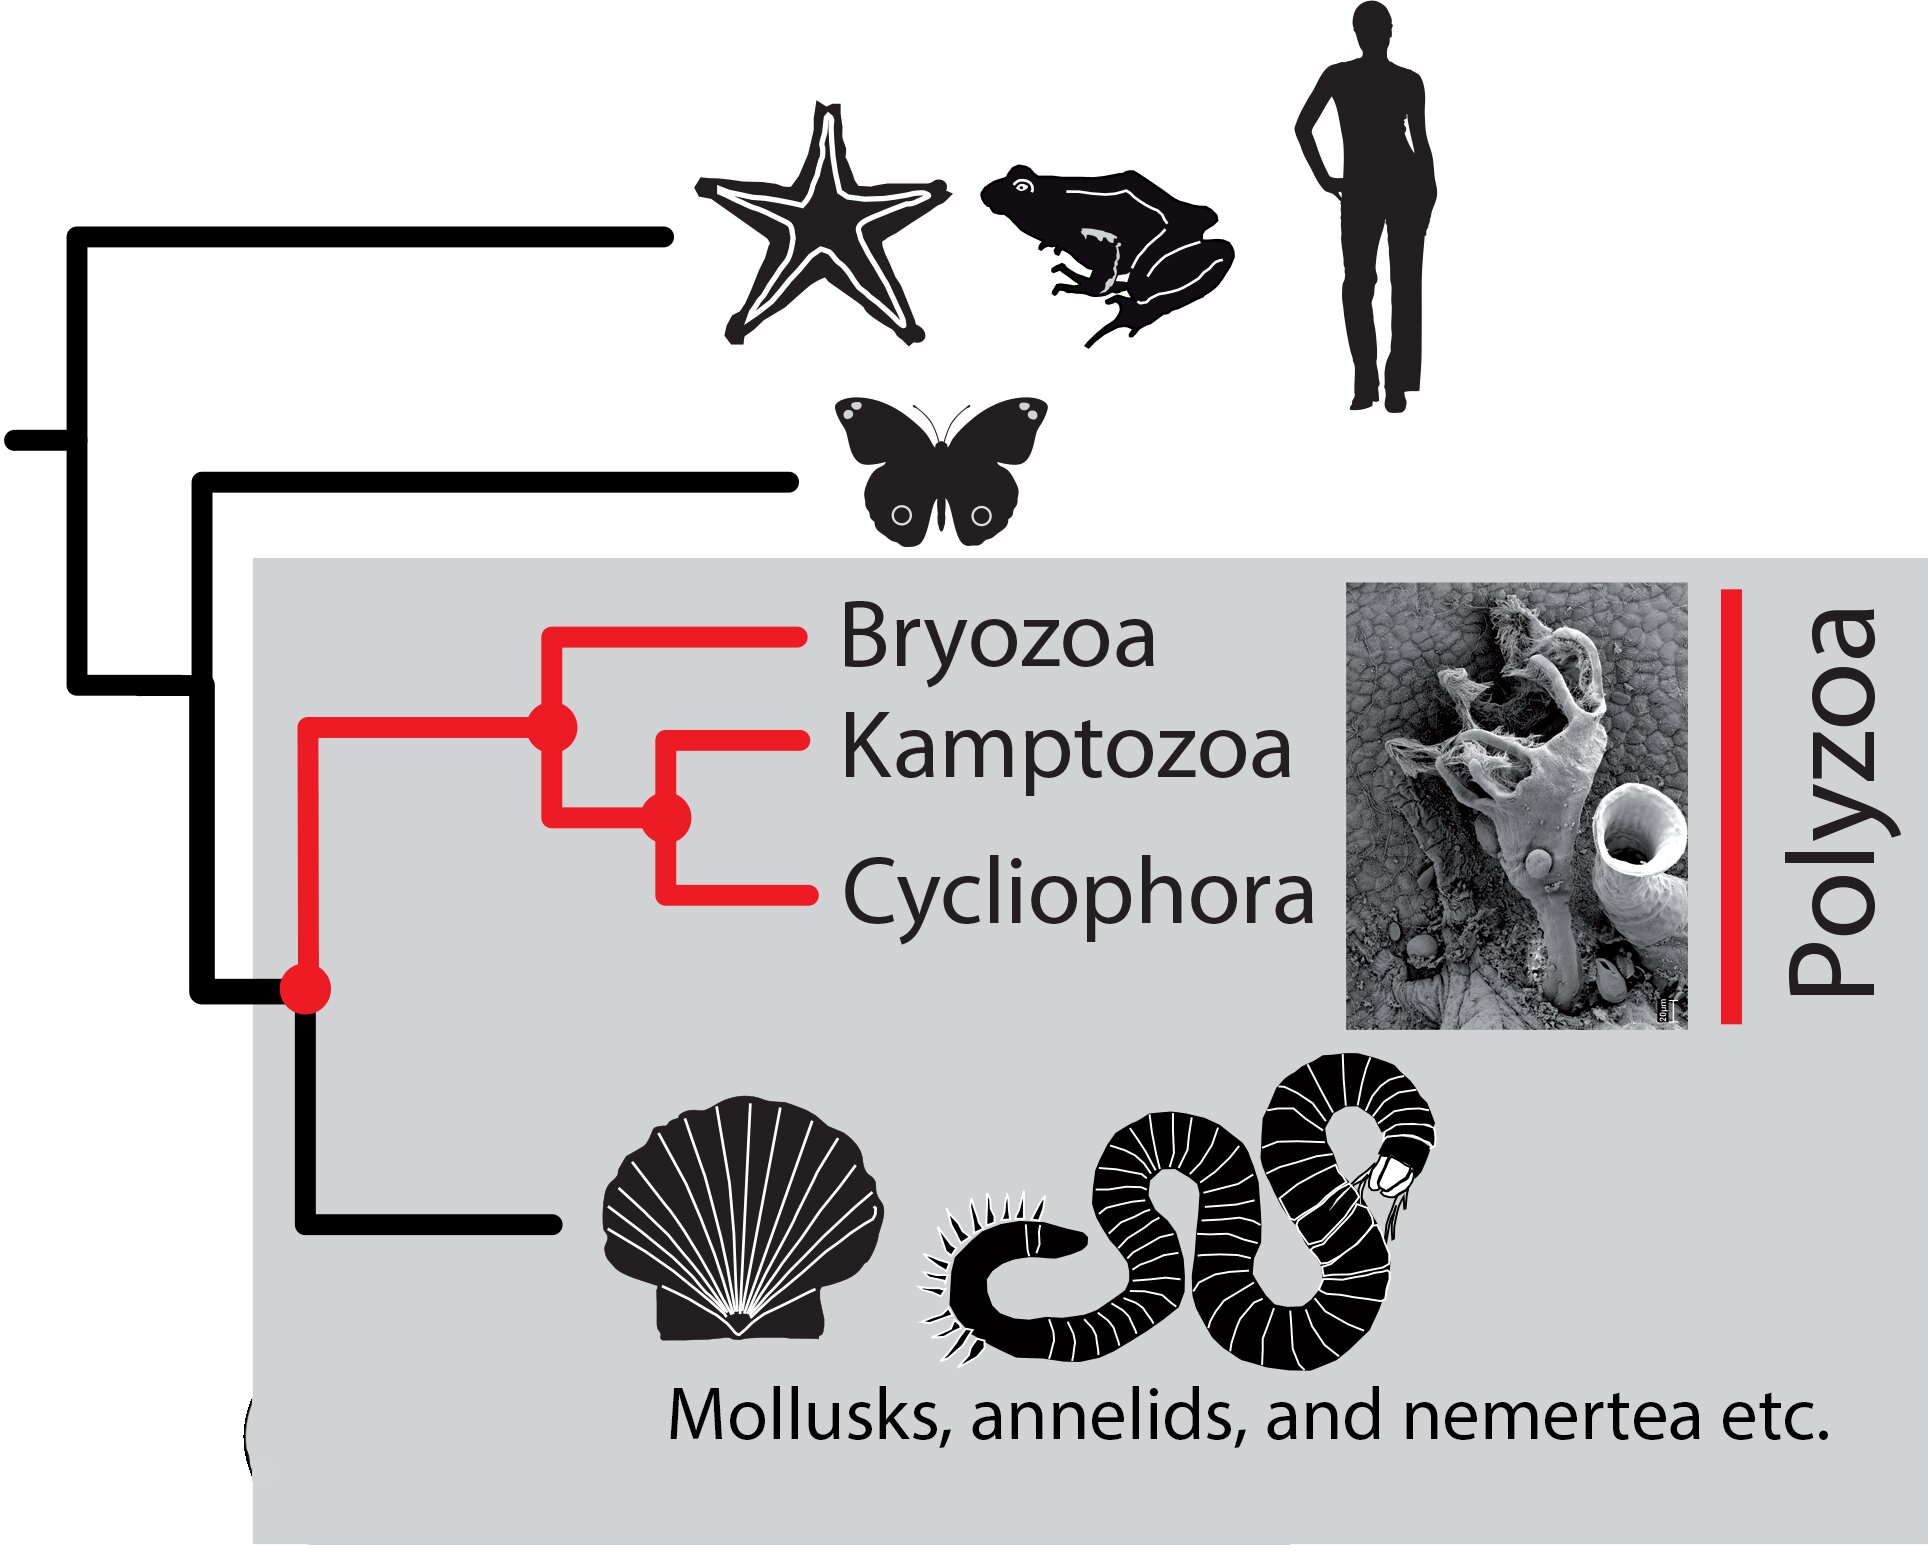 Hidden in genetics: The evolutionary interactions of two teams of ancient invertebrates exposed